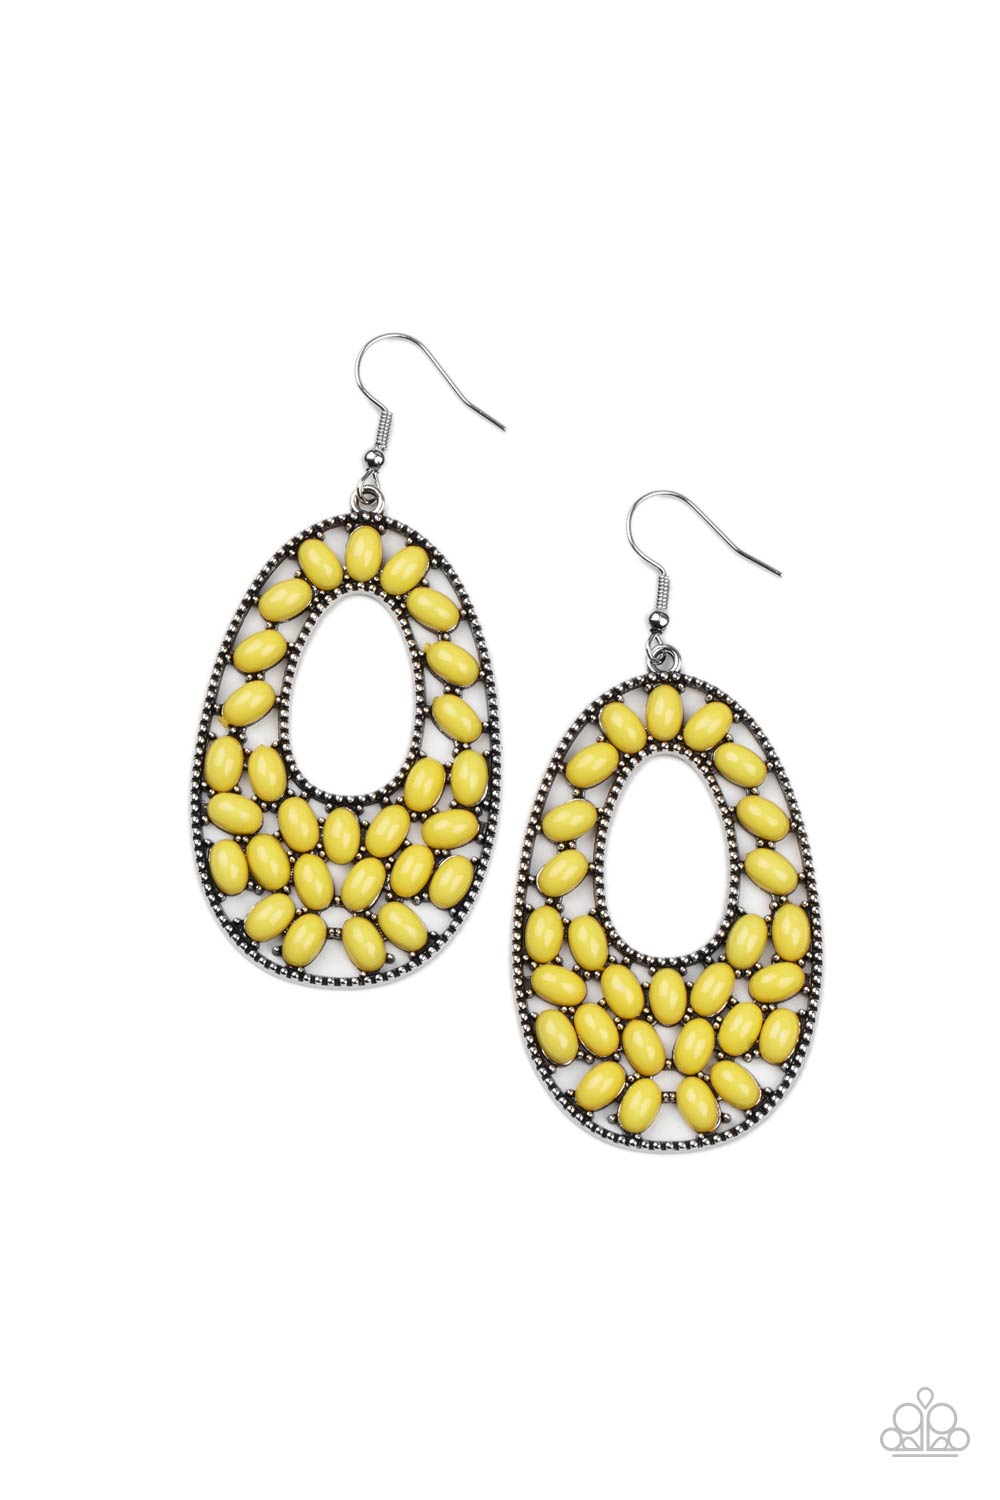 Paparazzi Beaded Shores - Yellow Earrings - A Finishing Touch Jewelry